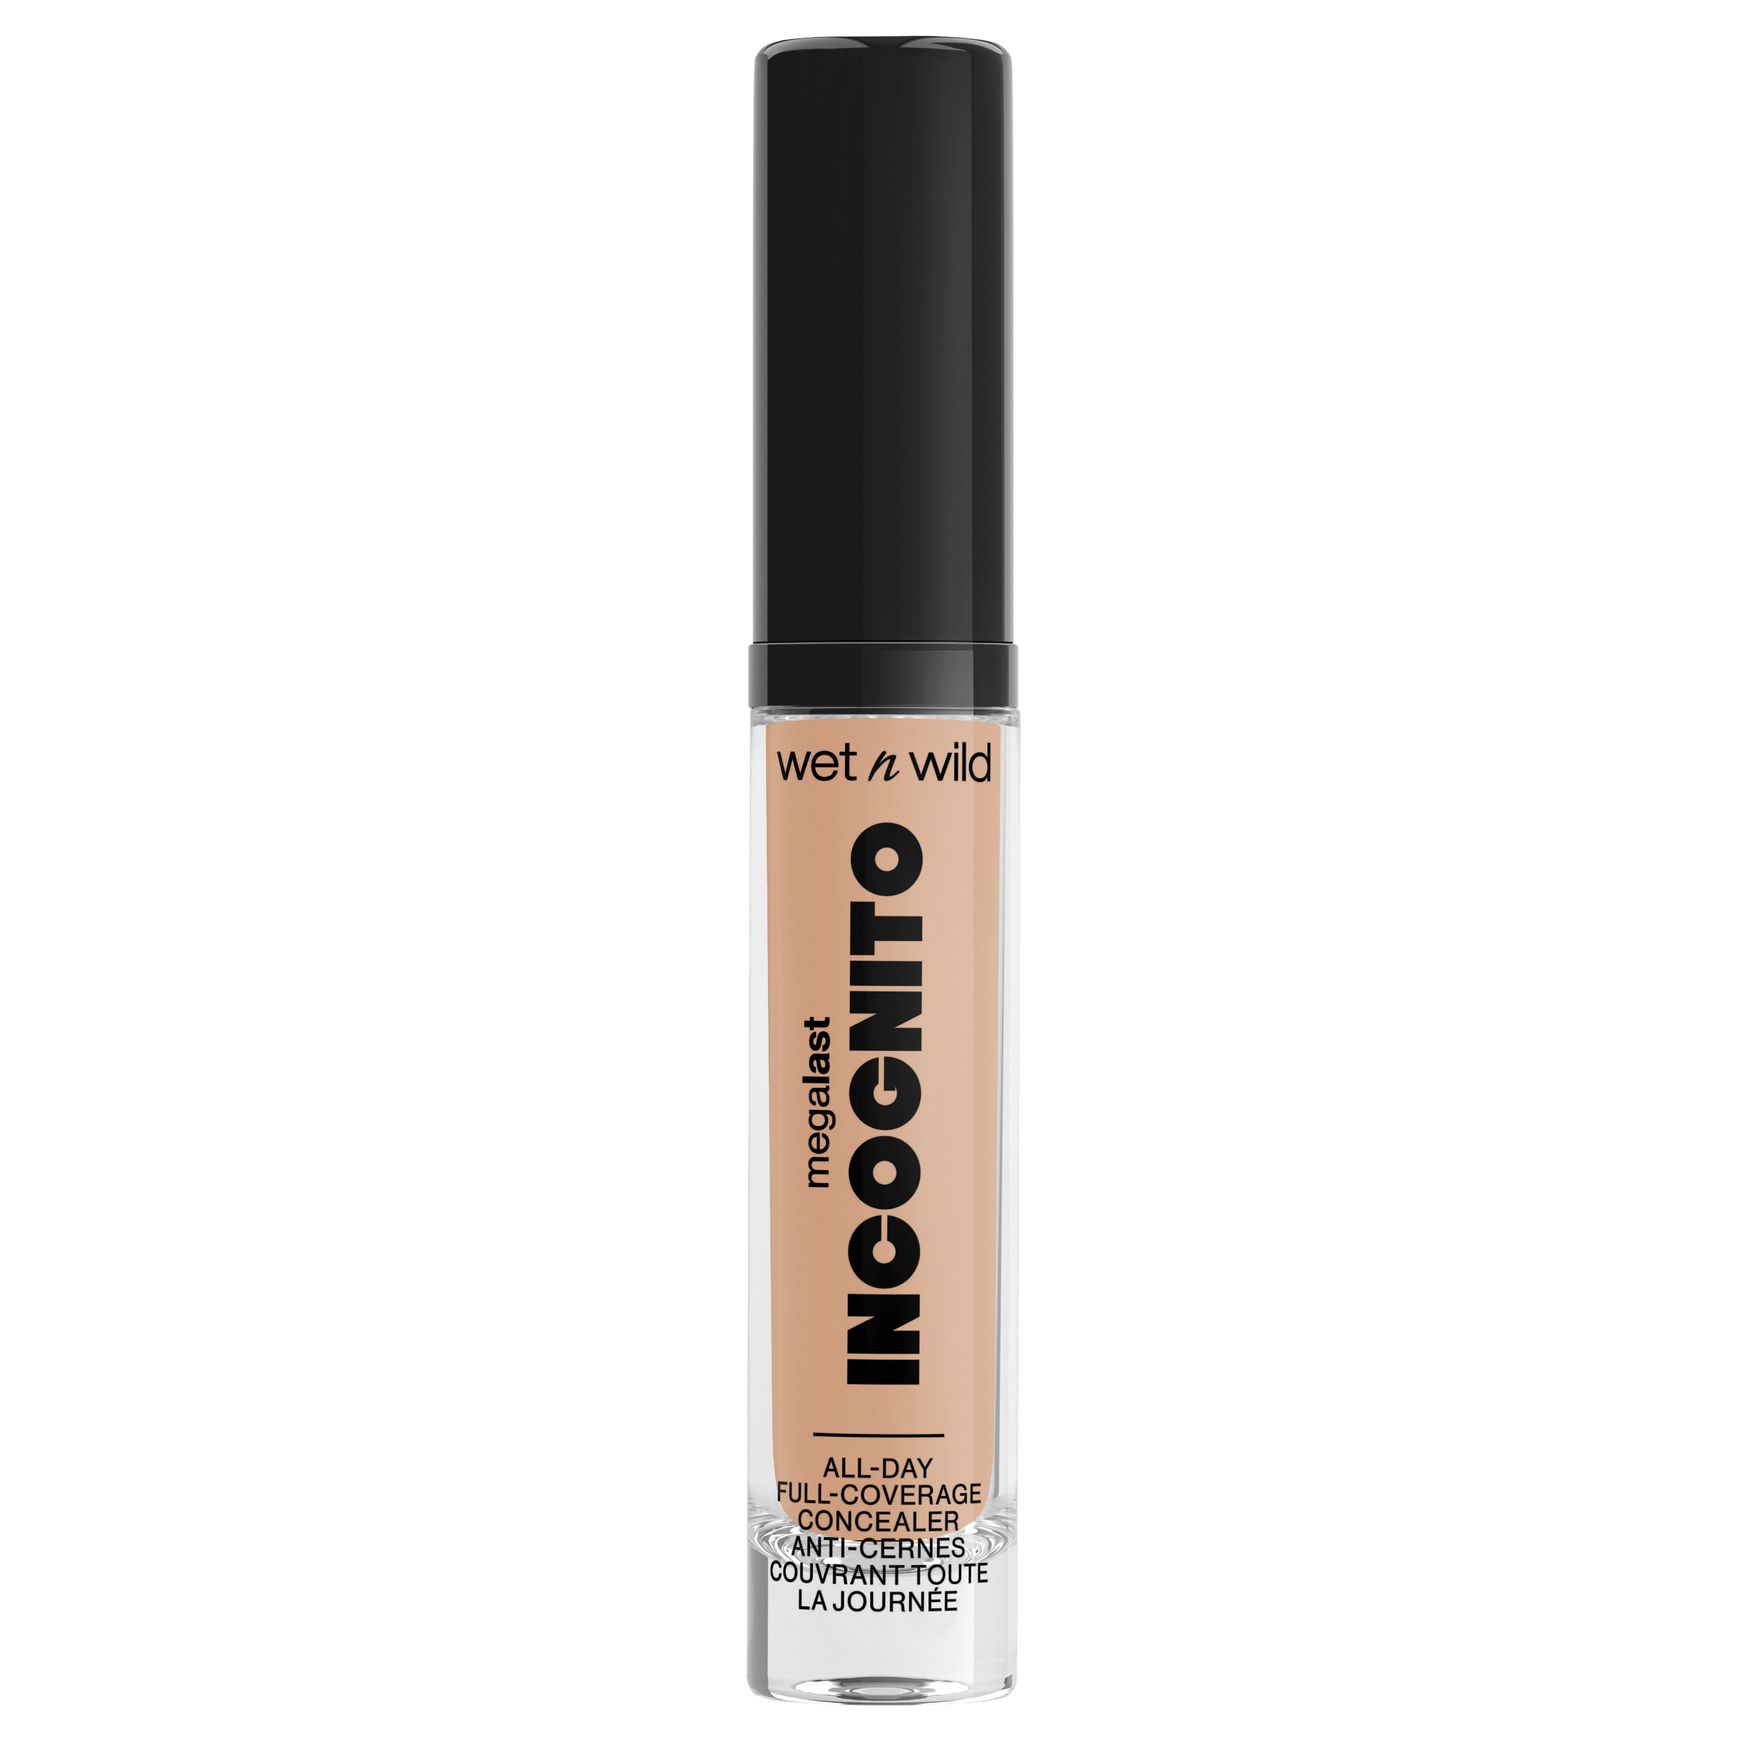 Консилер для лица Wet n Wild MegaLast Incognito All-Day Full Coverage Тон medium neutral консилер для лица full concealer c01 01 medium 1 шт full concealer